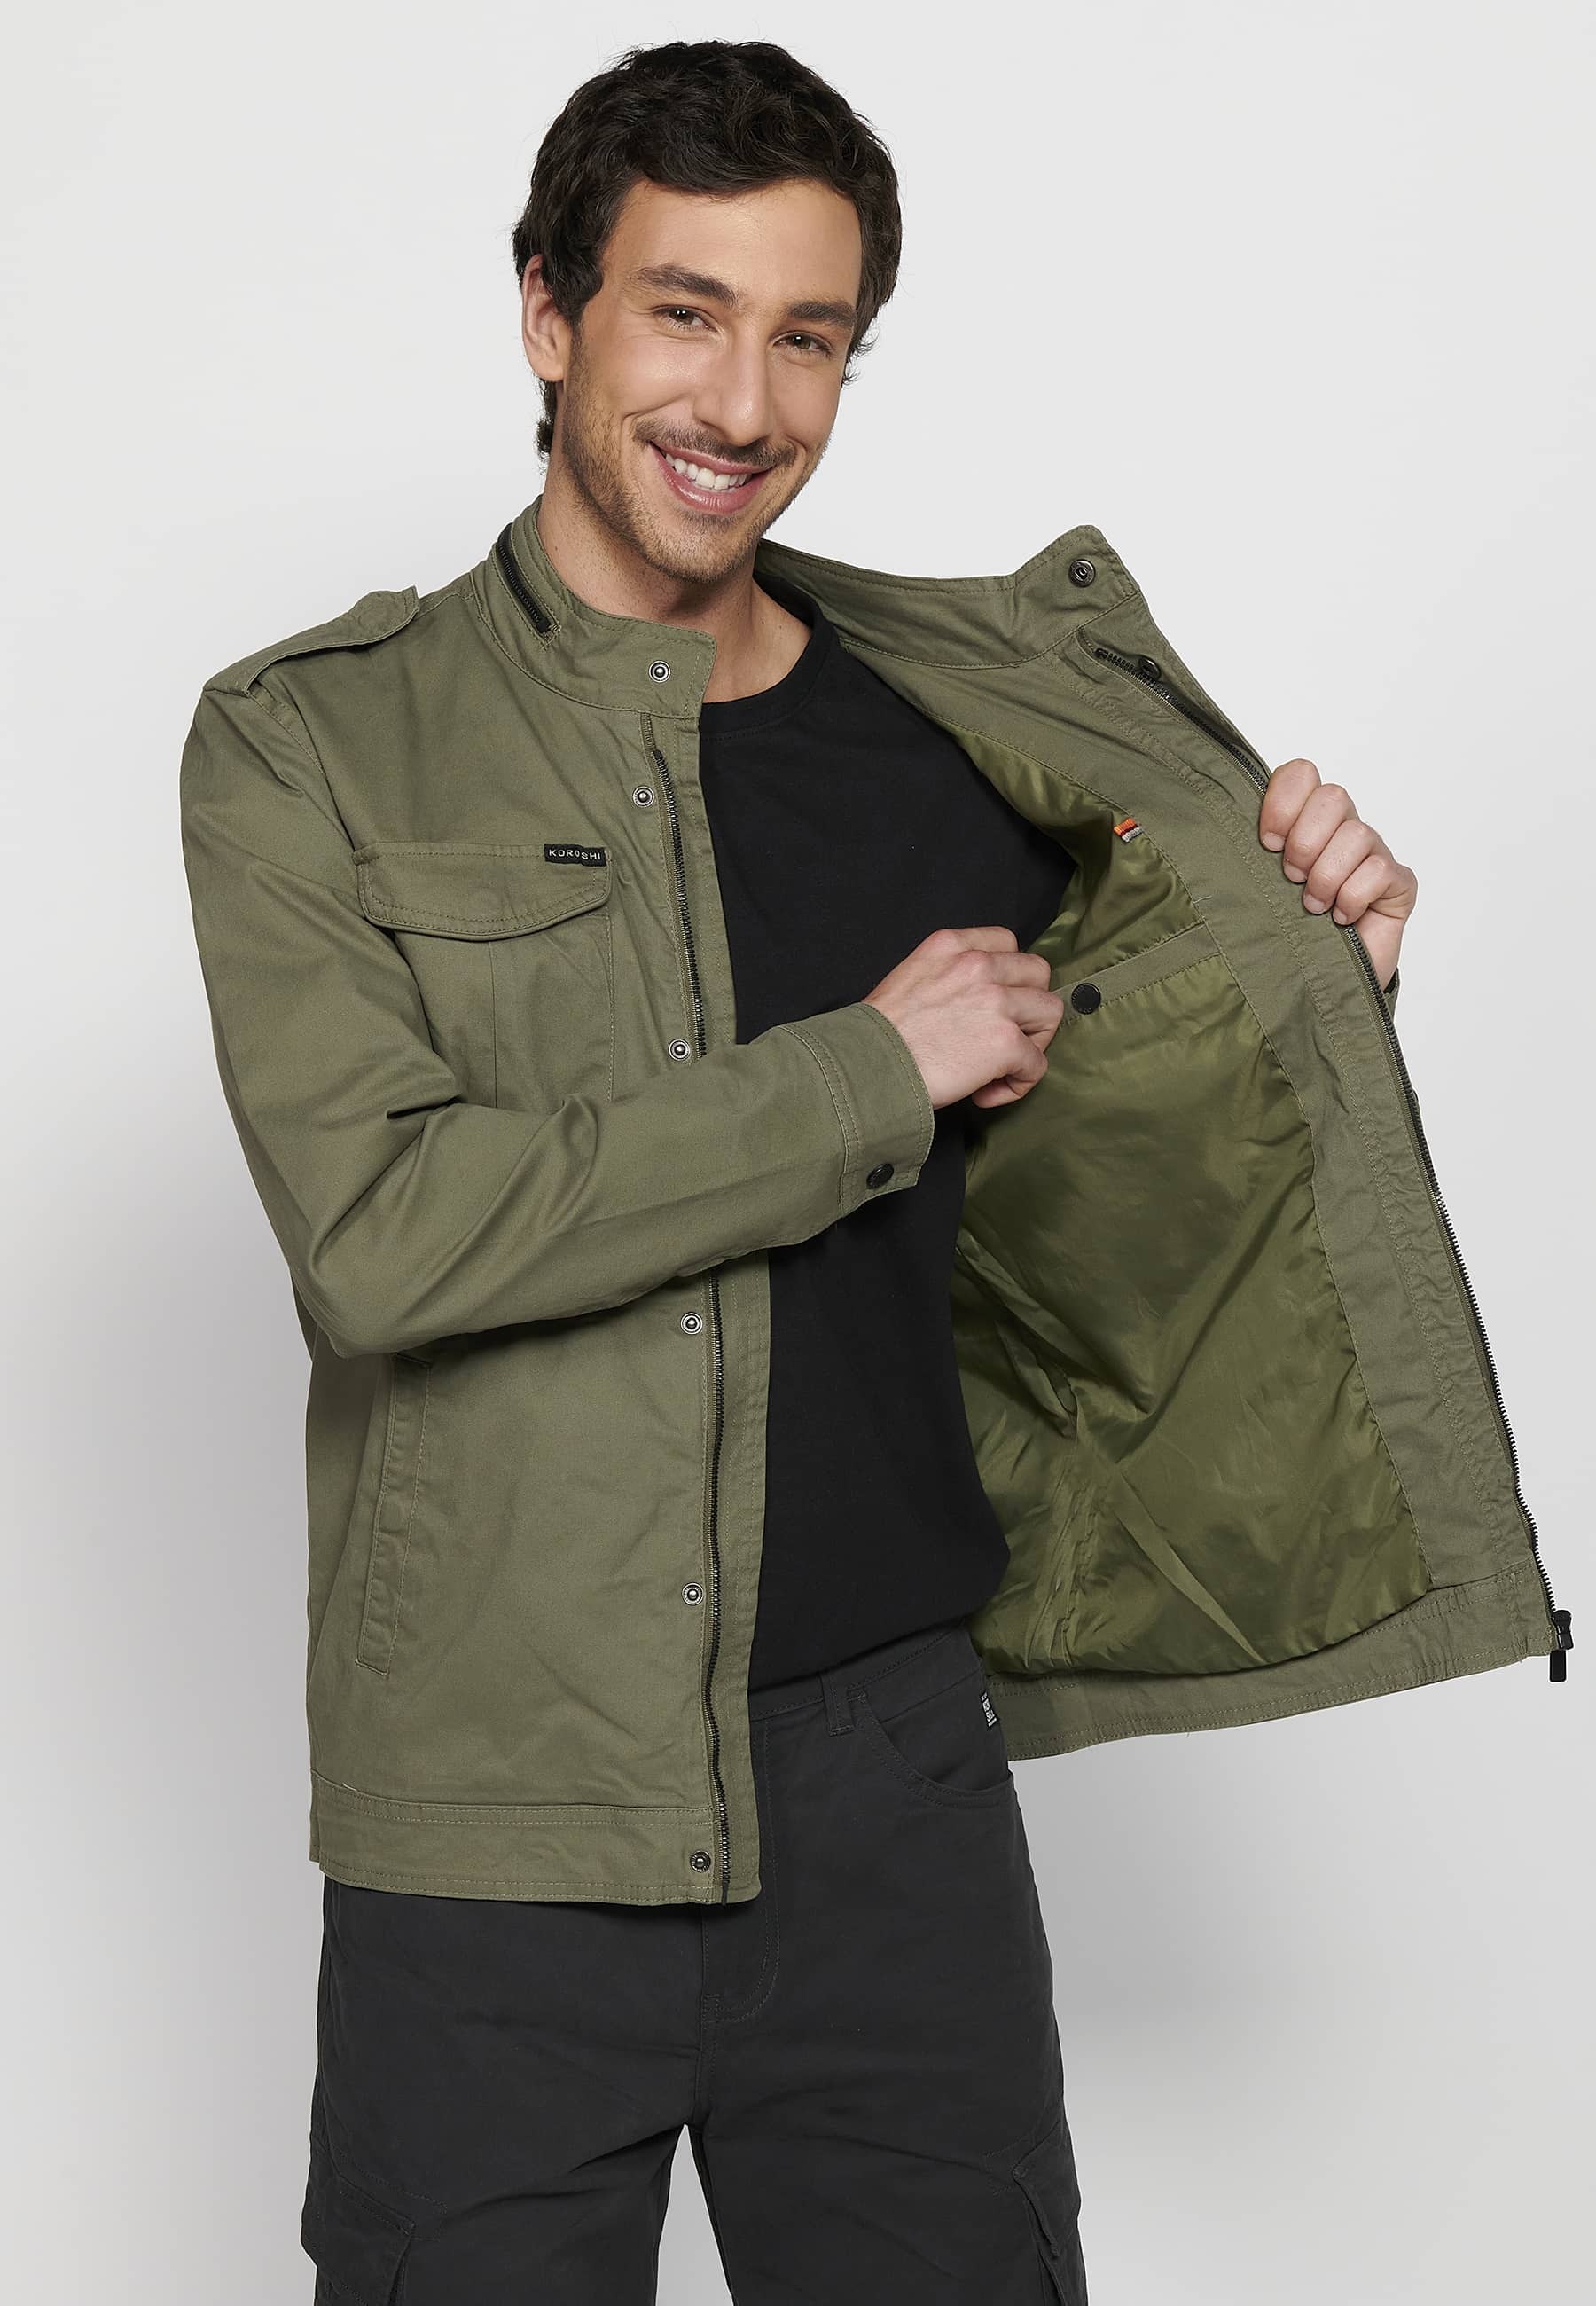 Long Sleeve Jacket with High Neck and Front Zipper Closure with Green Pockets for Men 5